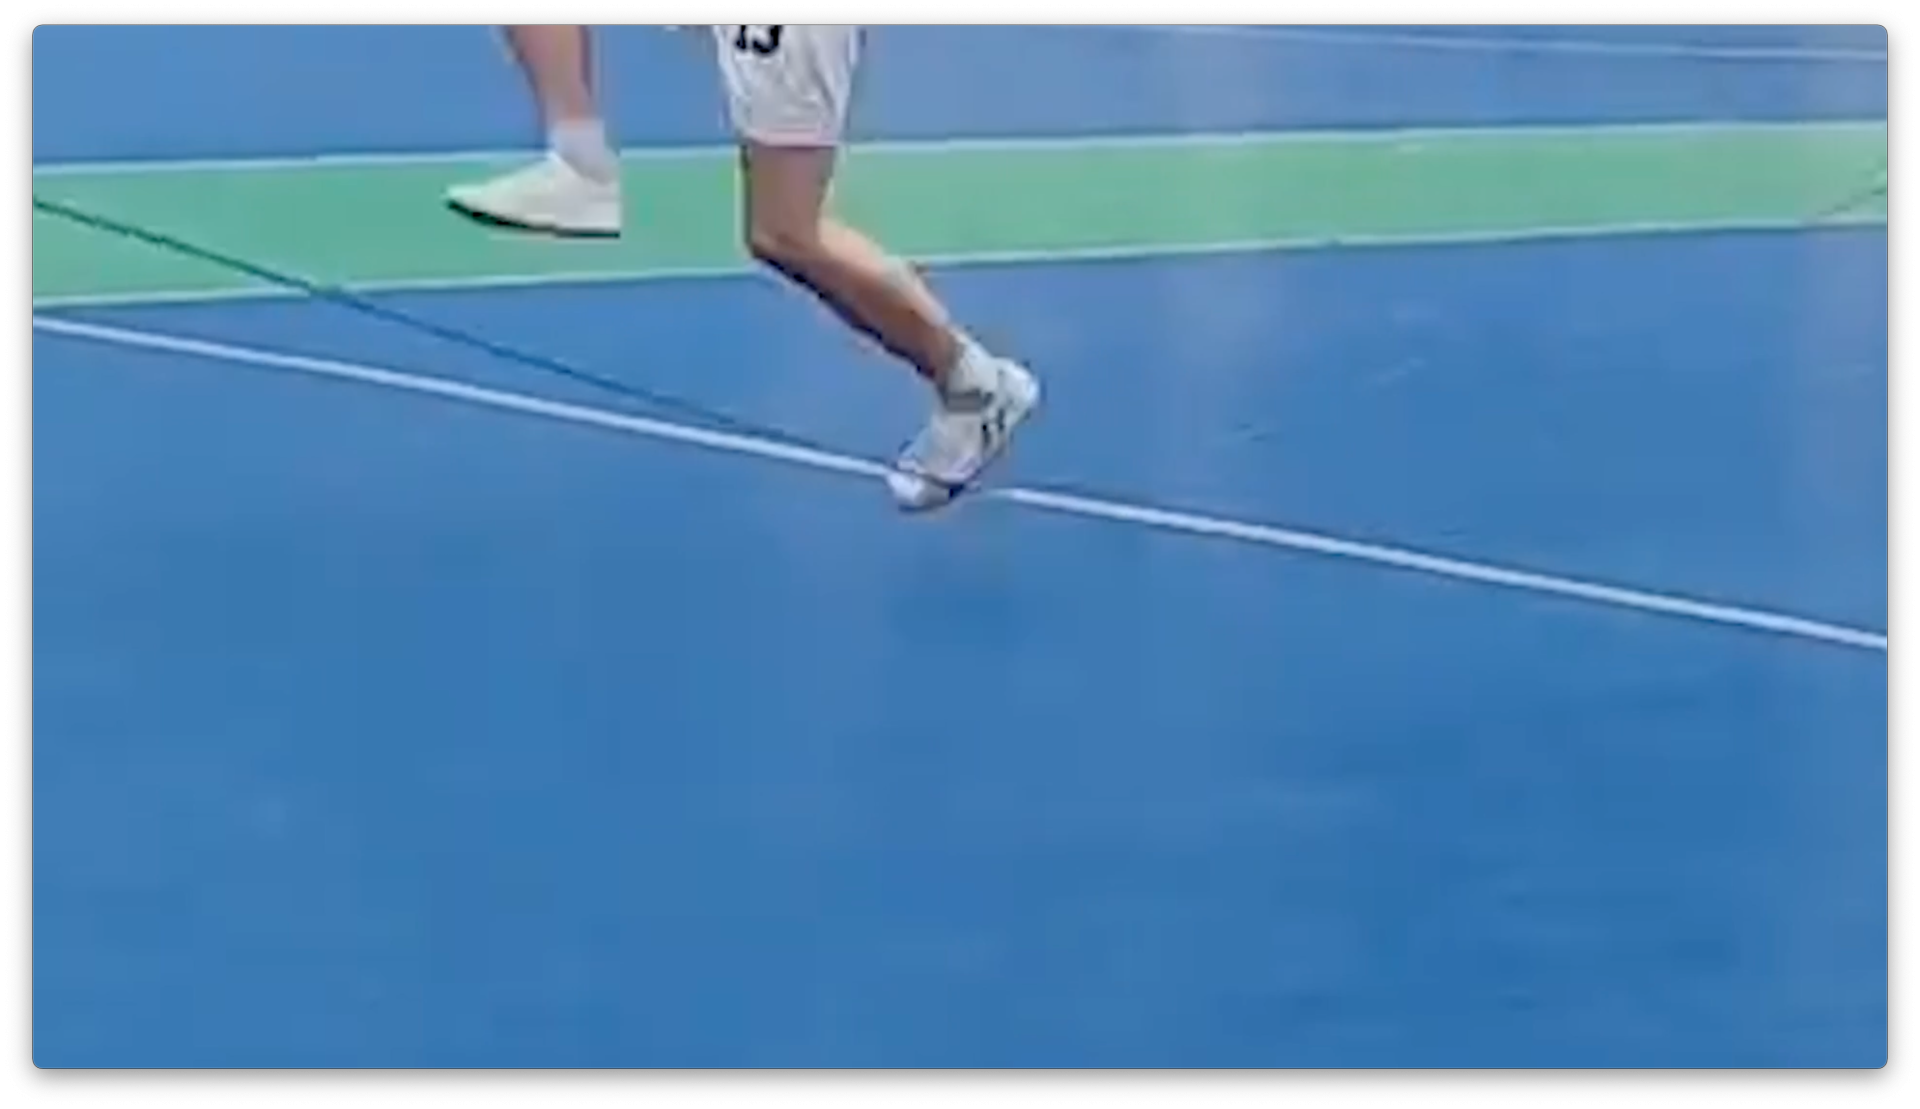 An image of a tennis player's legs jumping.